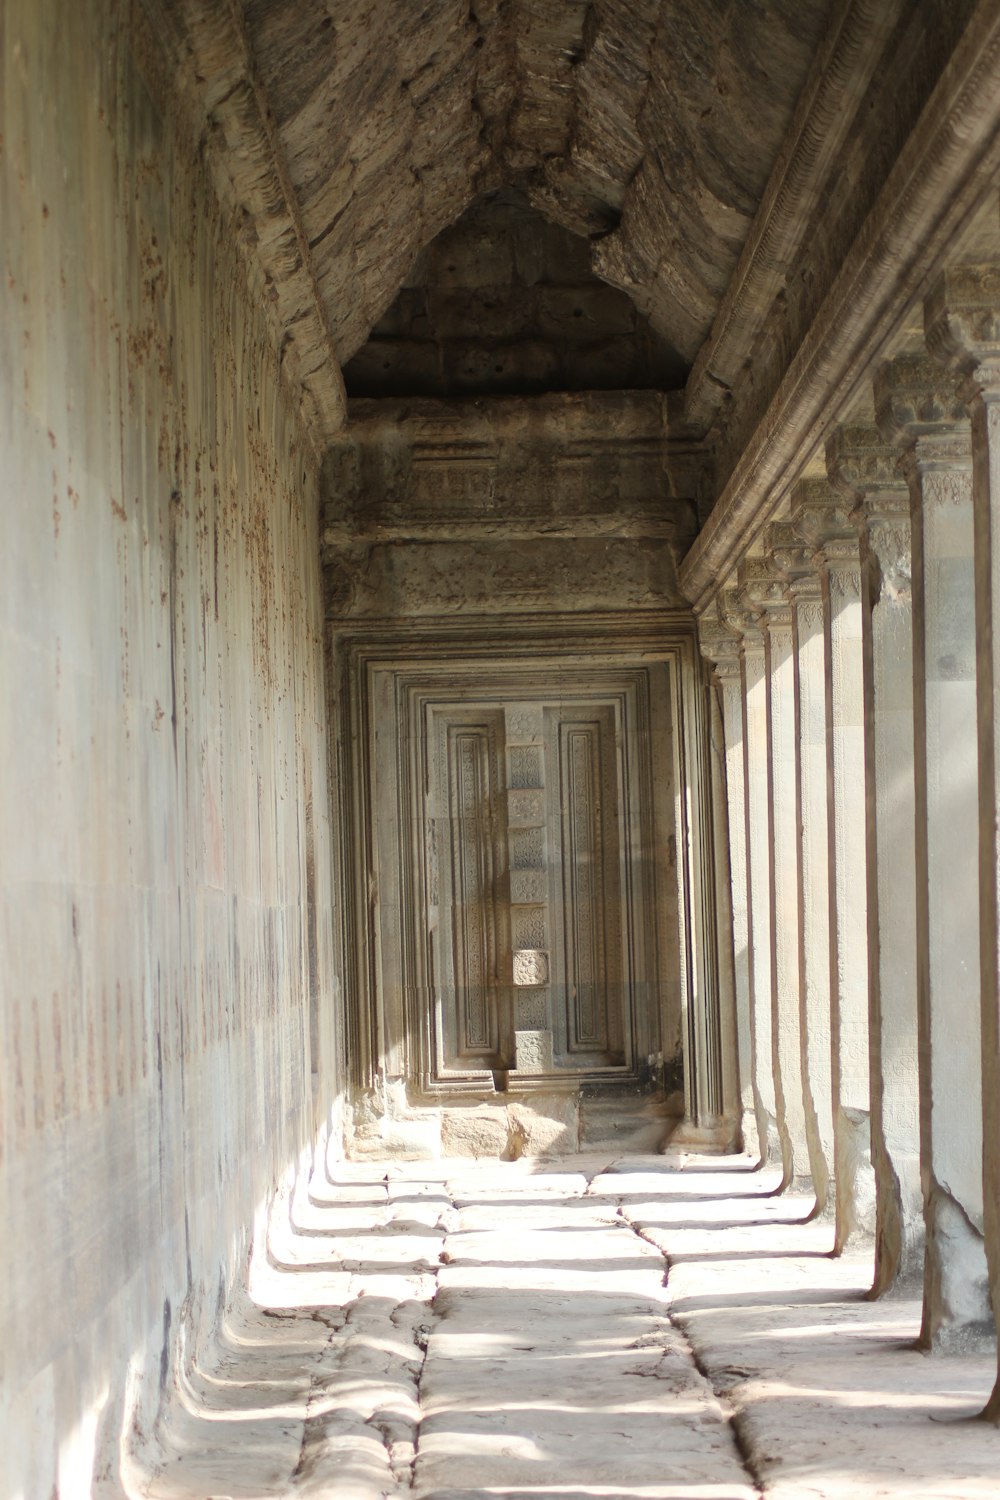 a long hallway in a stone building with columns